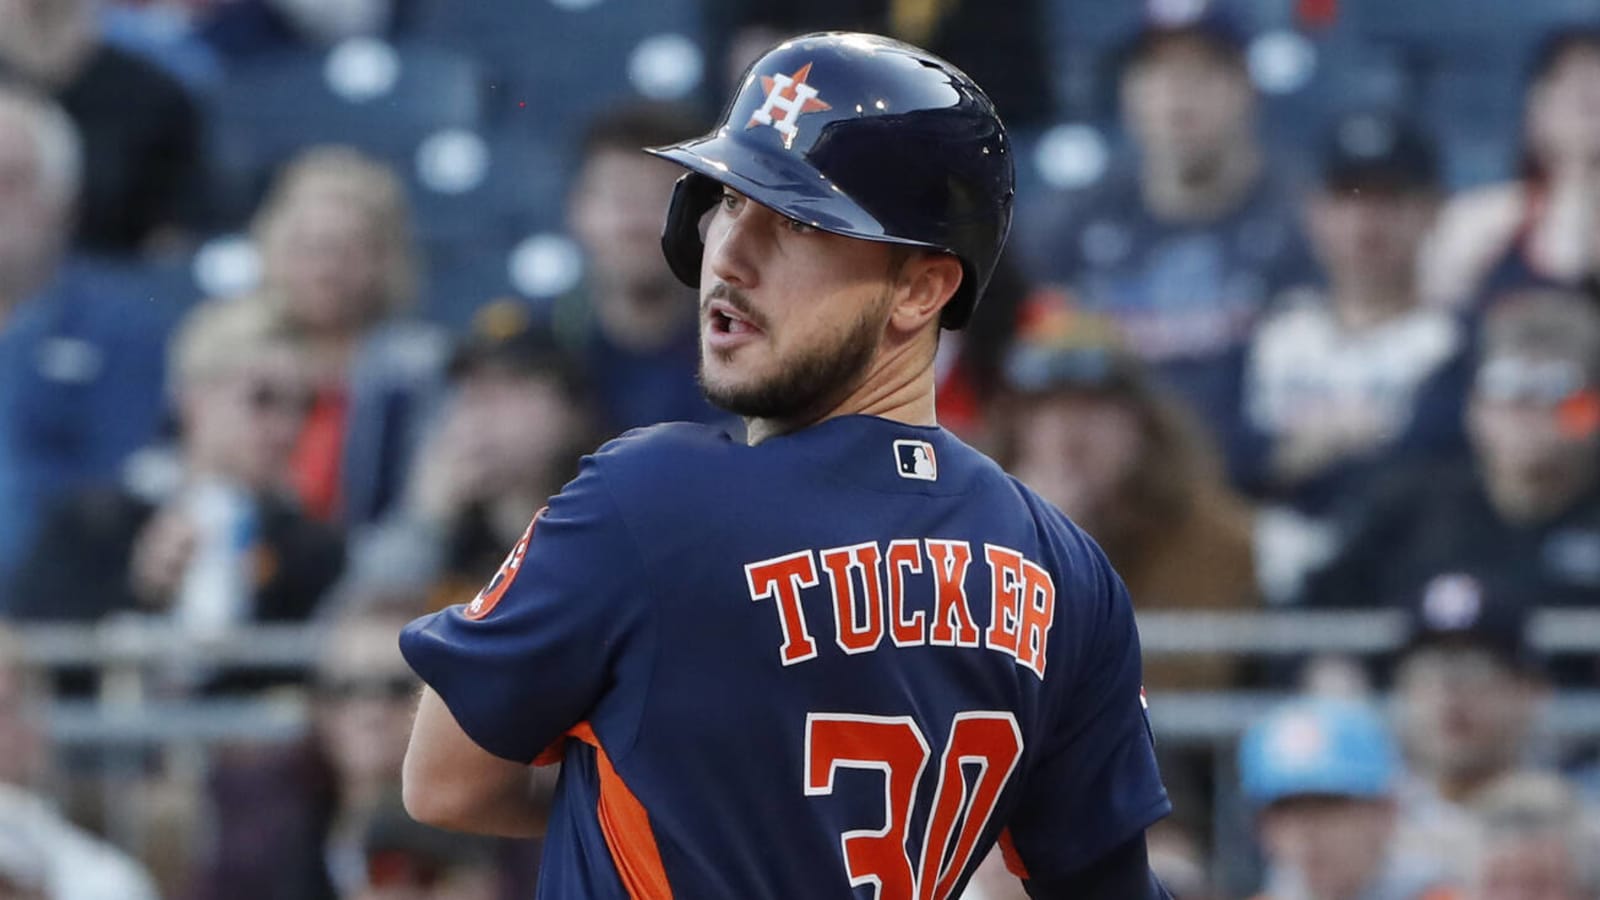 Kyle Tucker proves why Astros should extend him in dominating performance